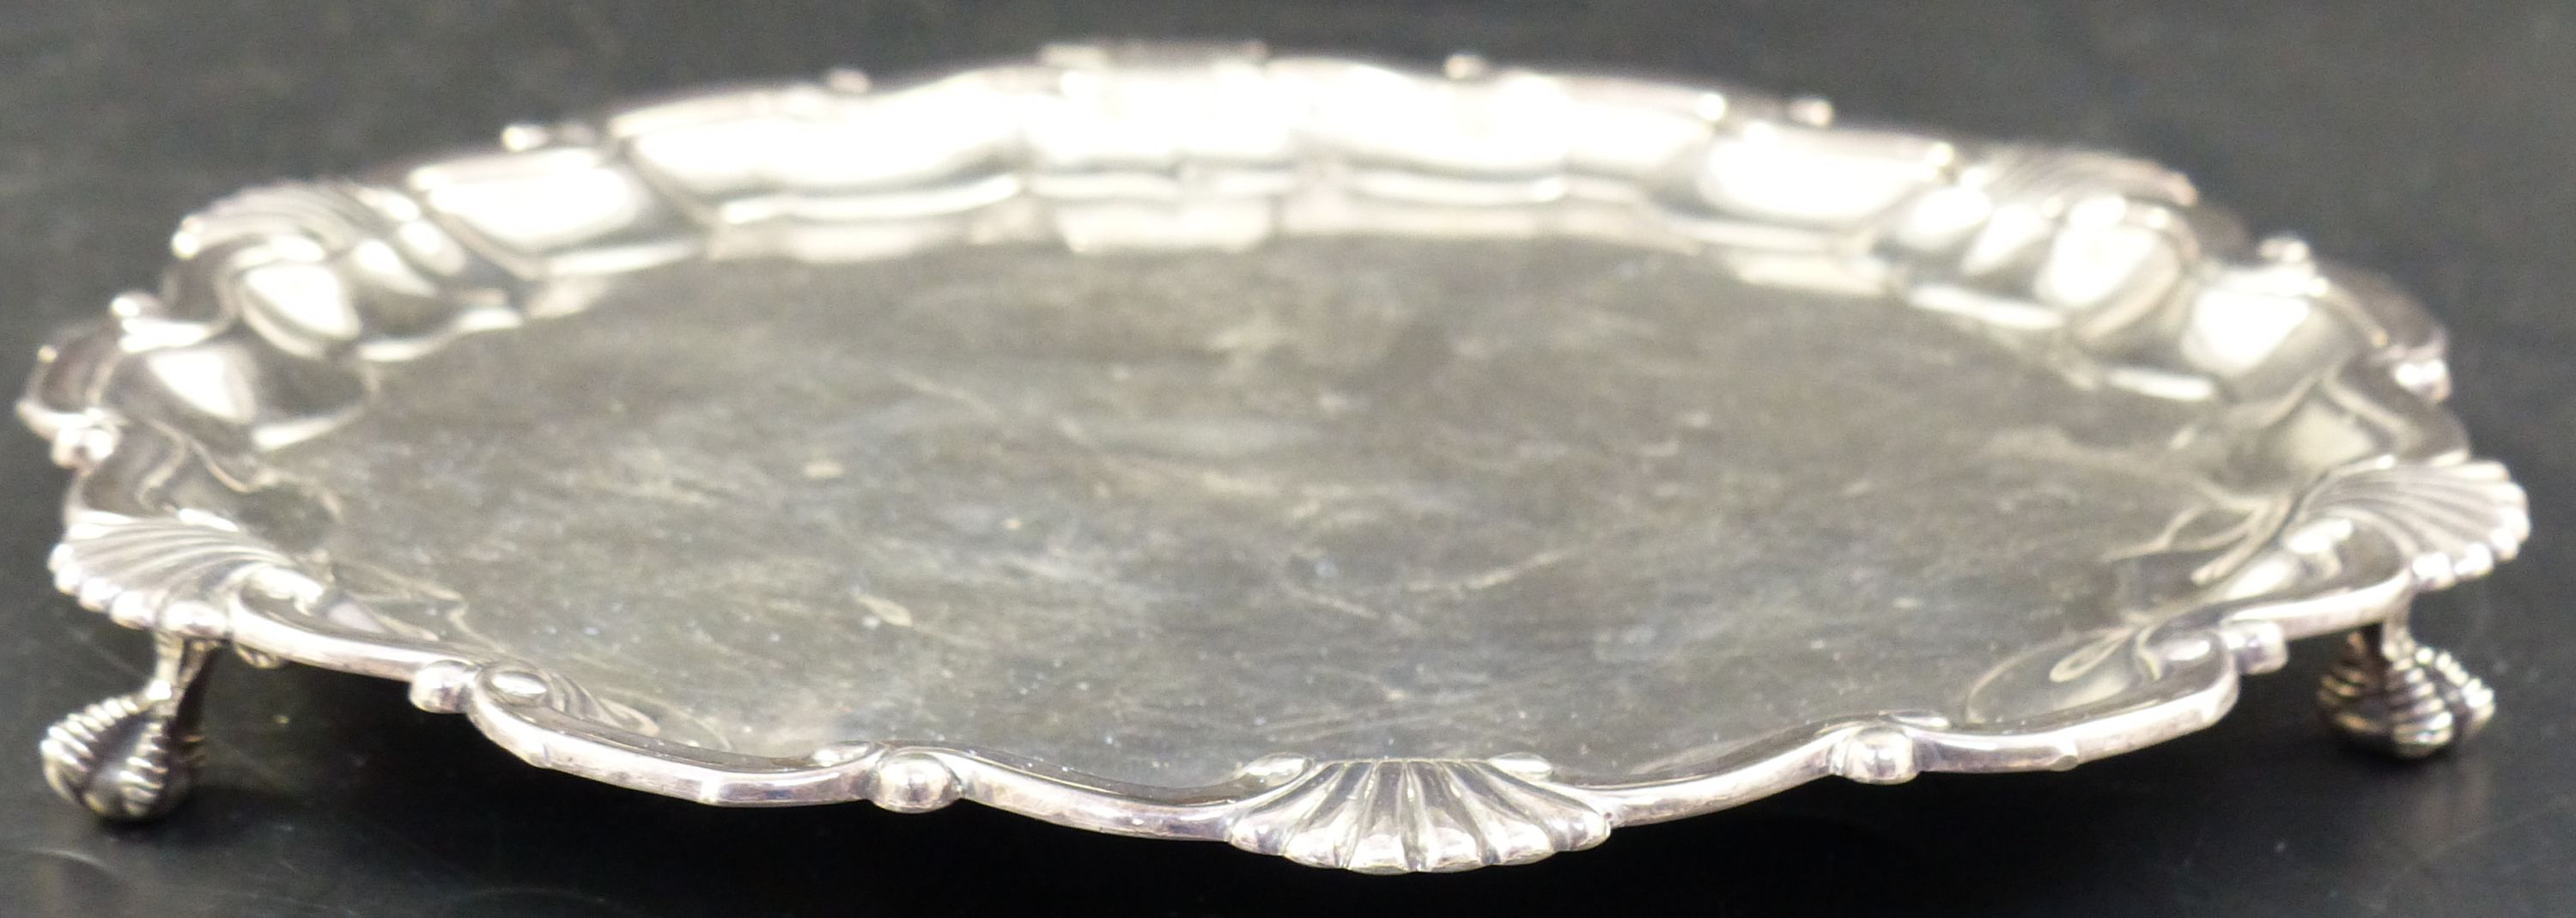 A late Victorian silver salver with shell and scroll border, 21.2cm, 10.5oz